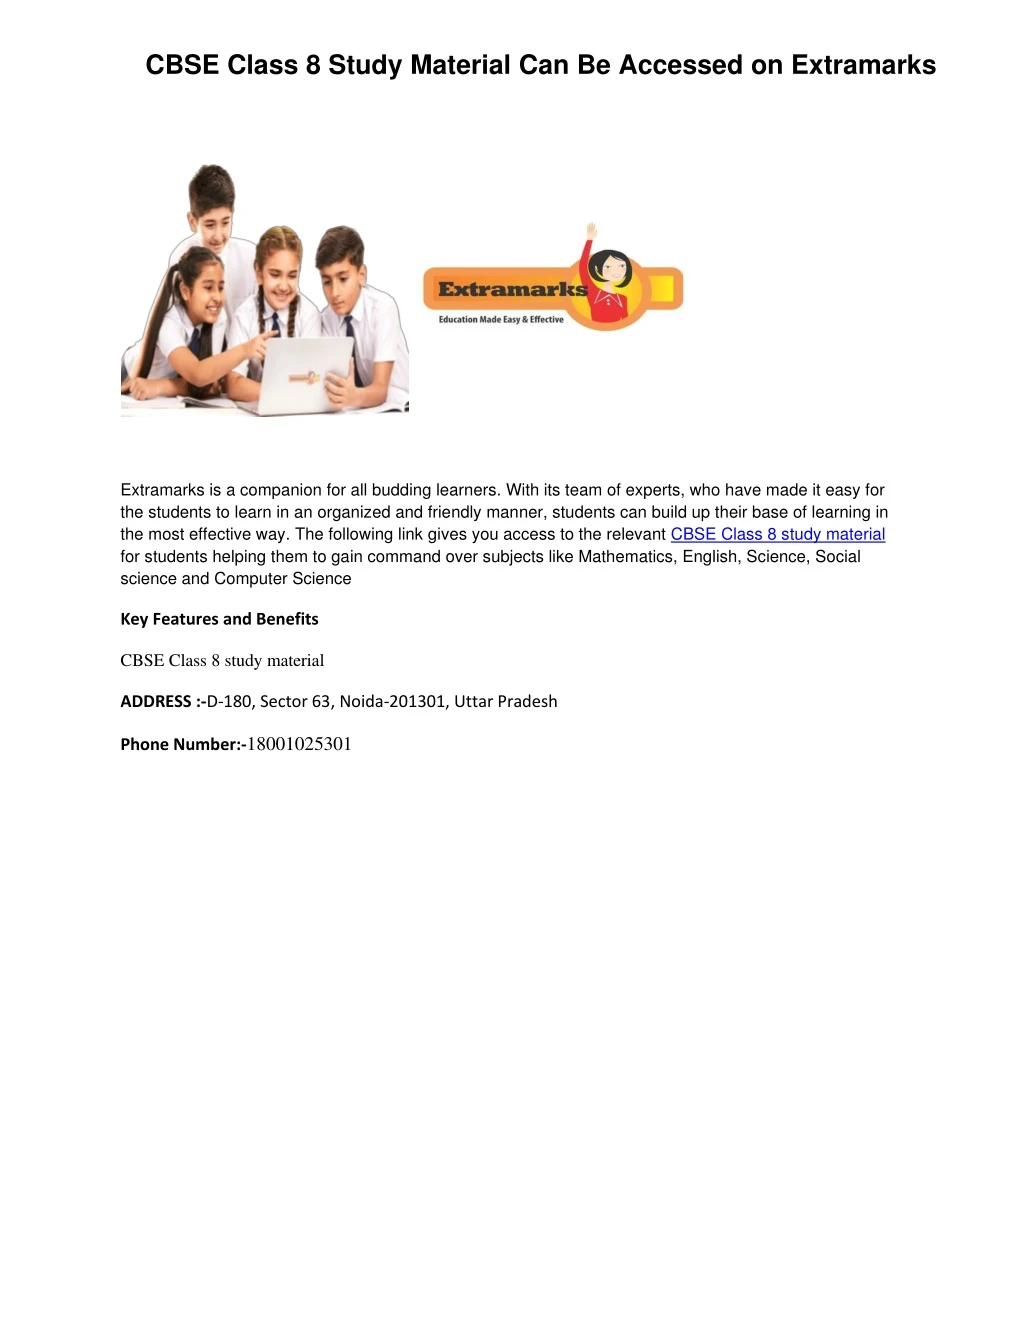 cbse class 8 study material can be accessed